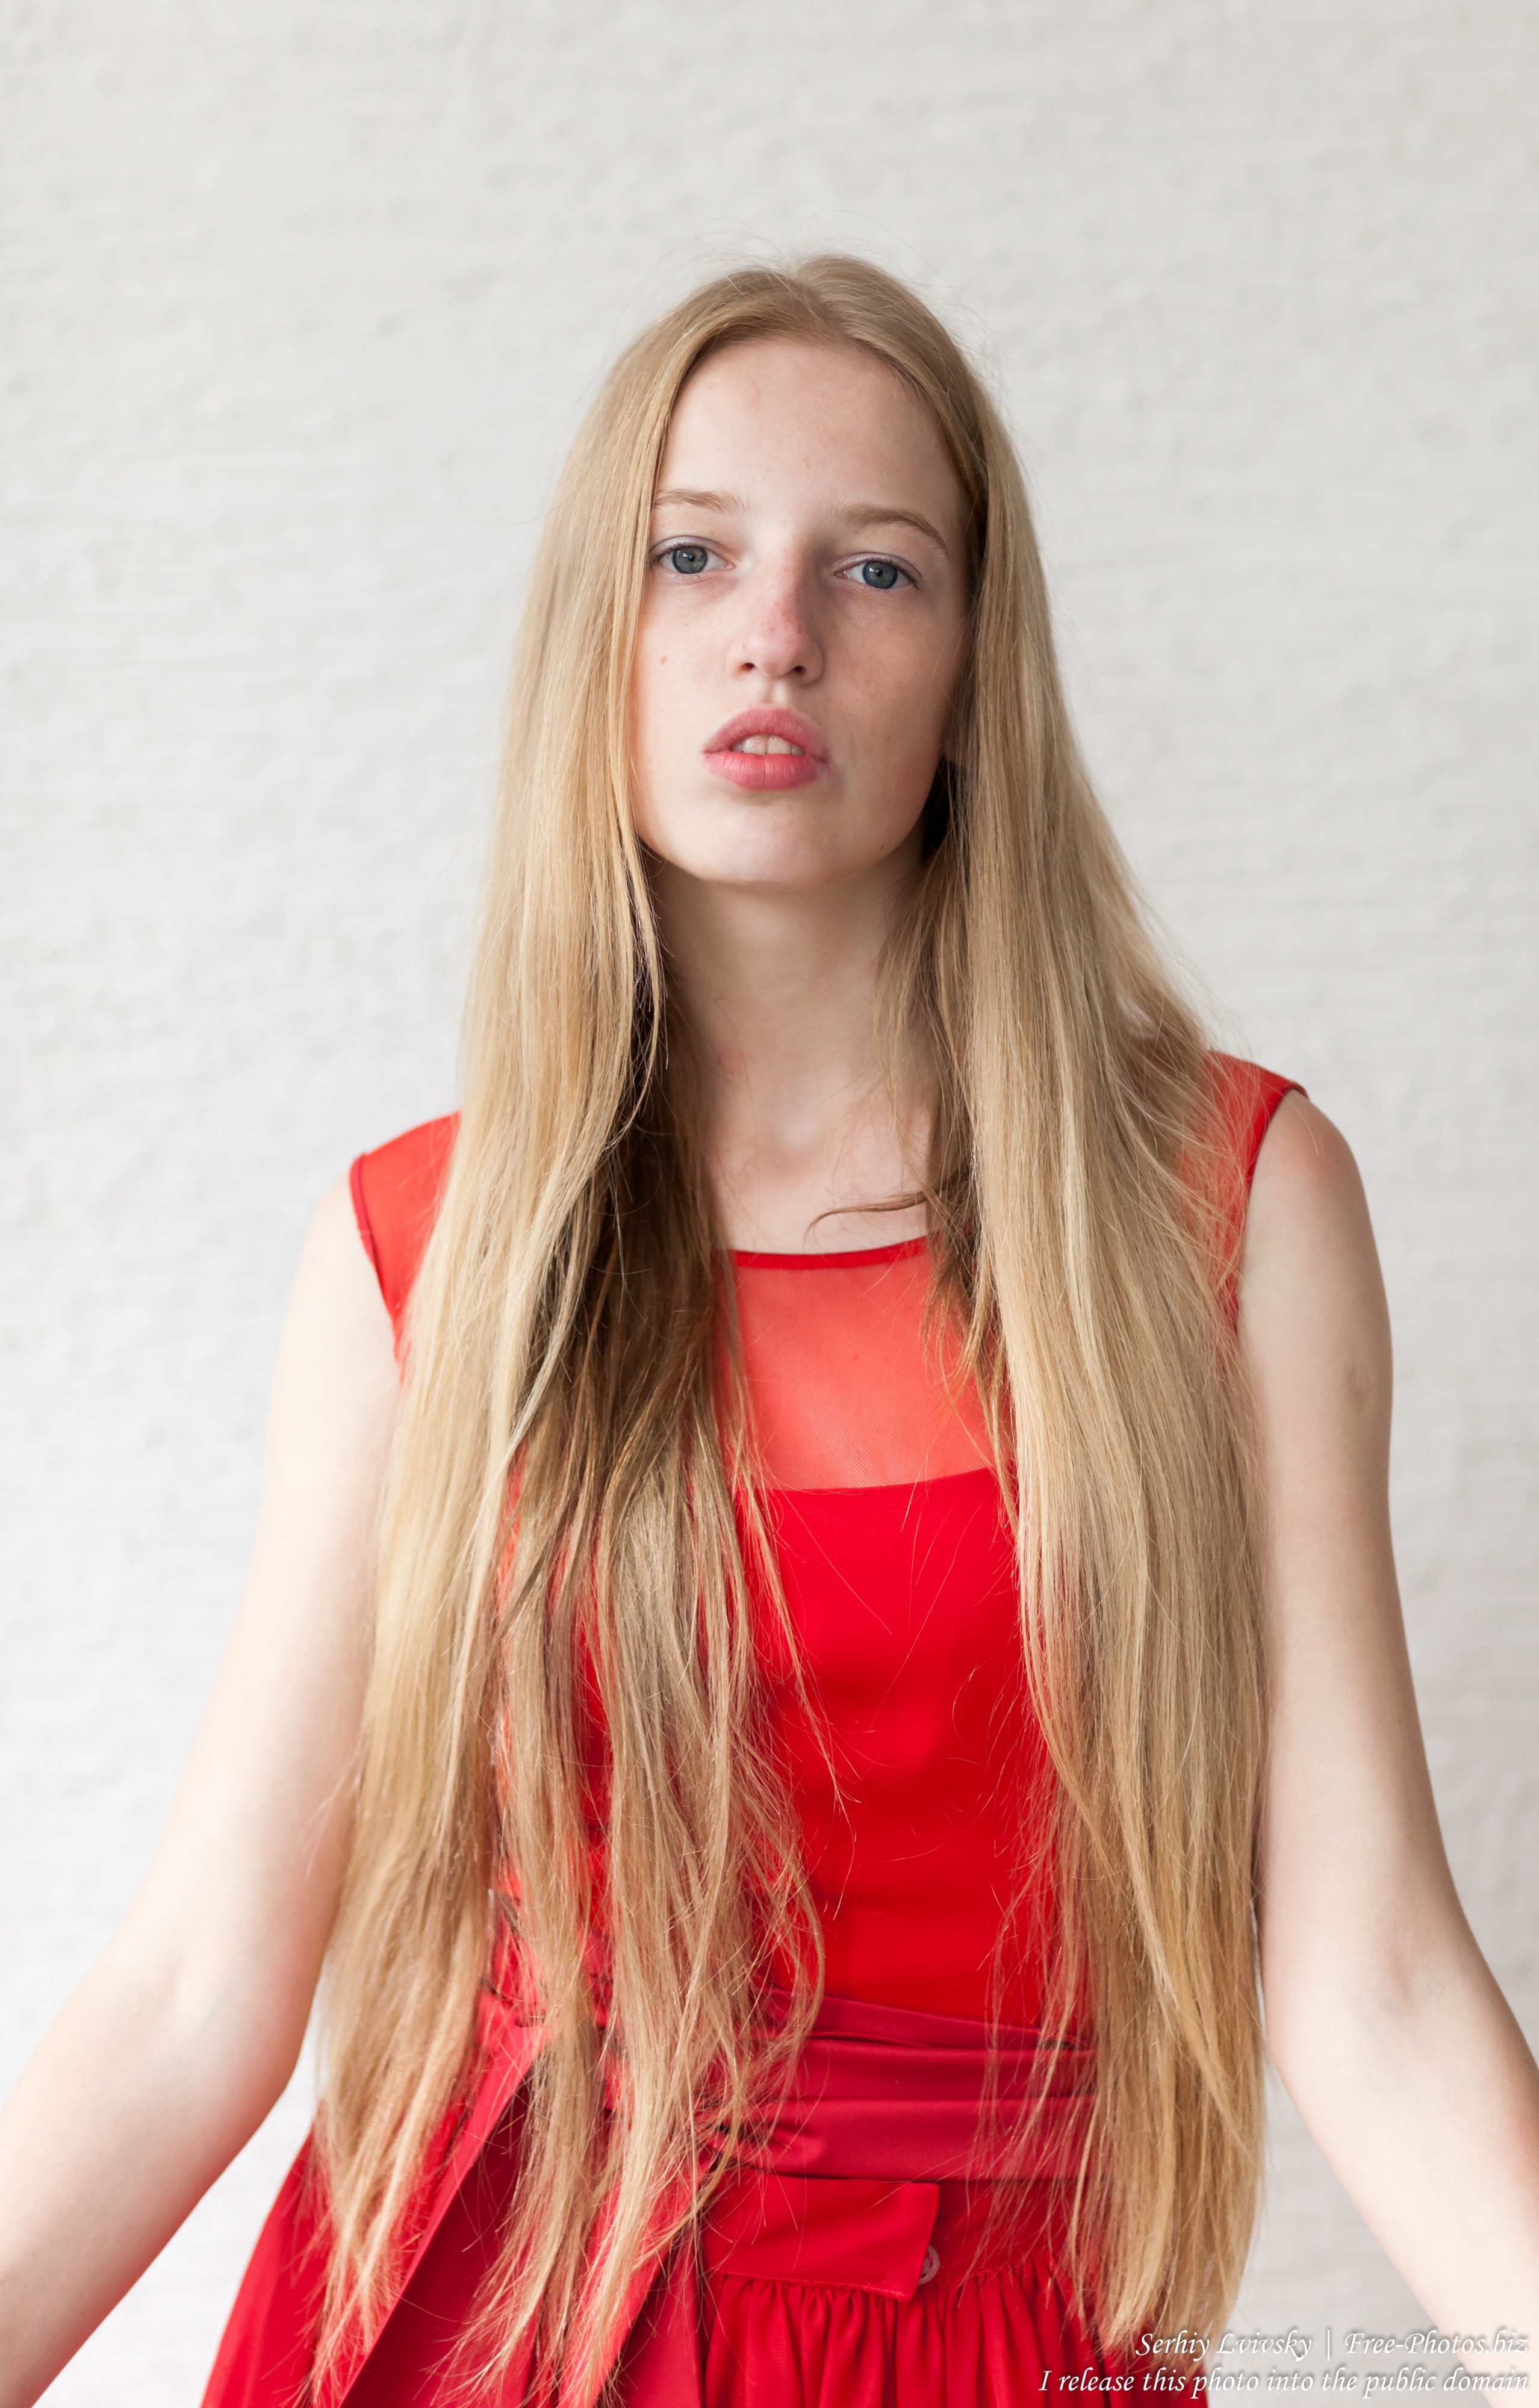 Photo Of A 17 Year Old Catholic Natural Blond Girl Photographed In September 2016 By Serhiy 